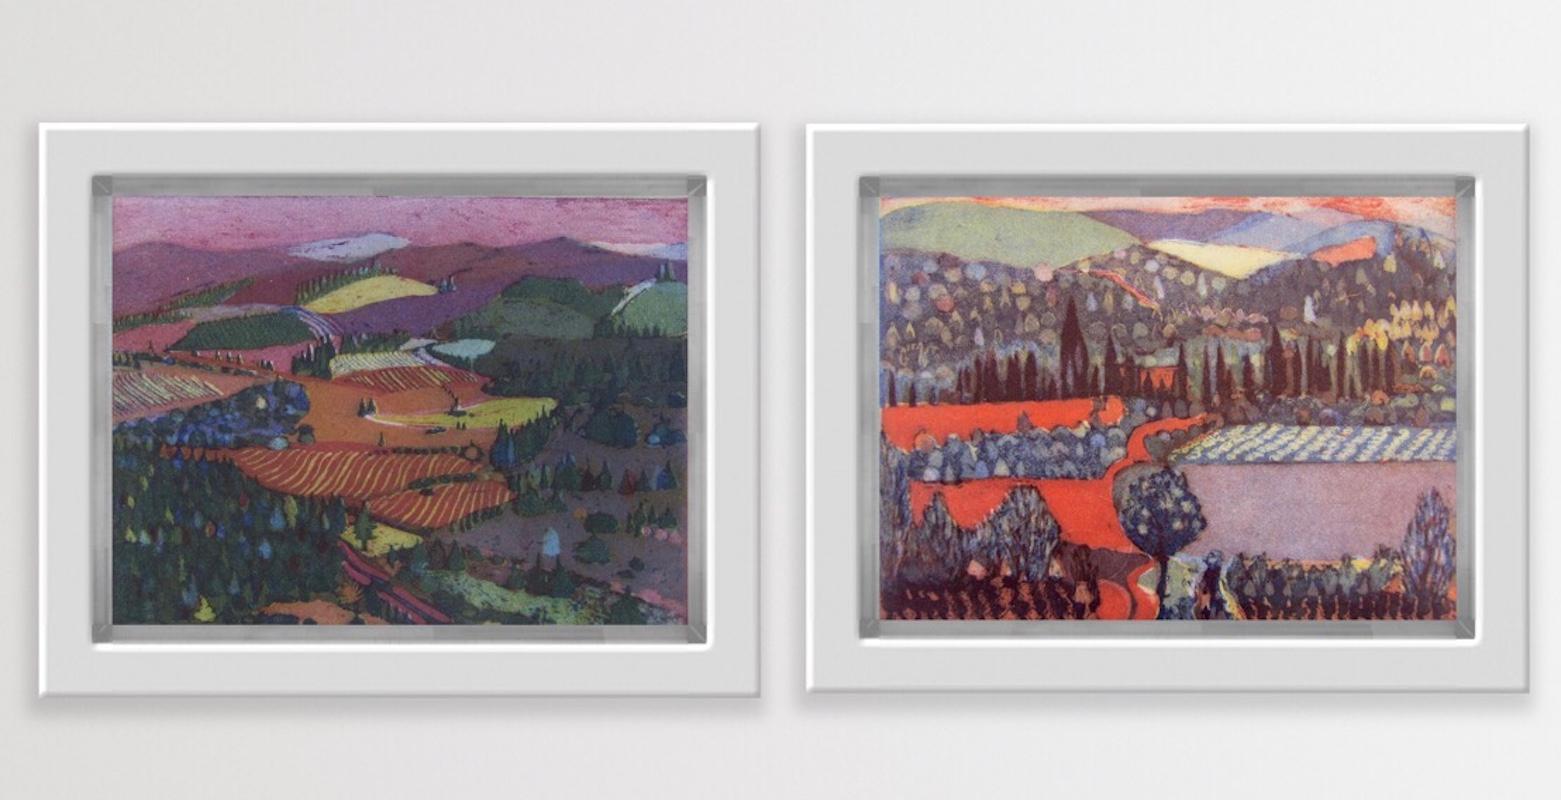 Karen Keogh Figurative Print - Over the Hill and Far Away and Magenta Sky diptych